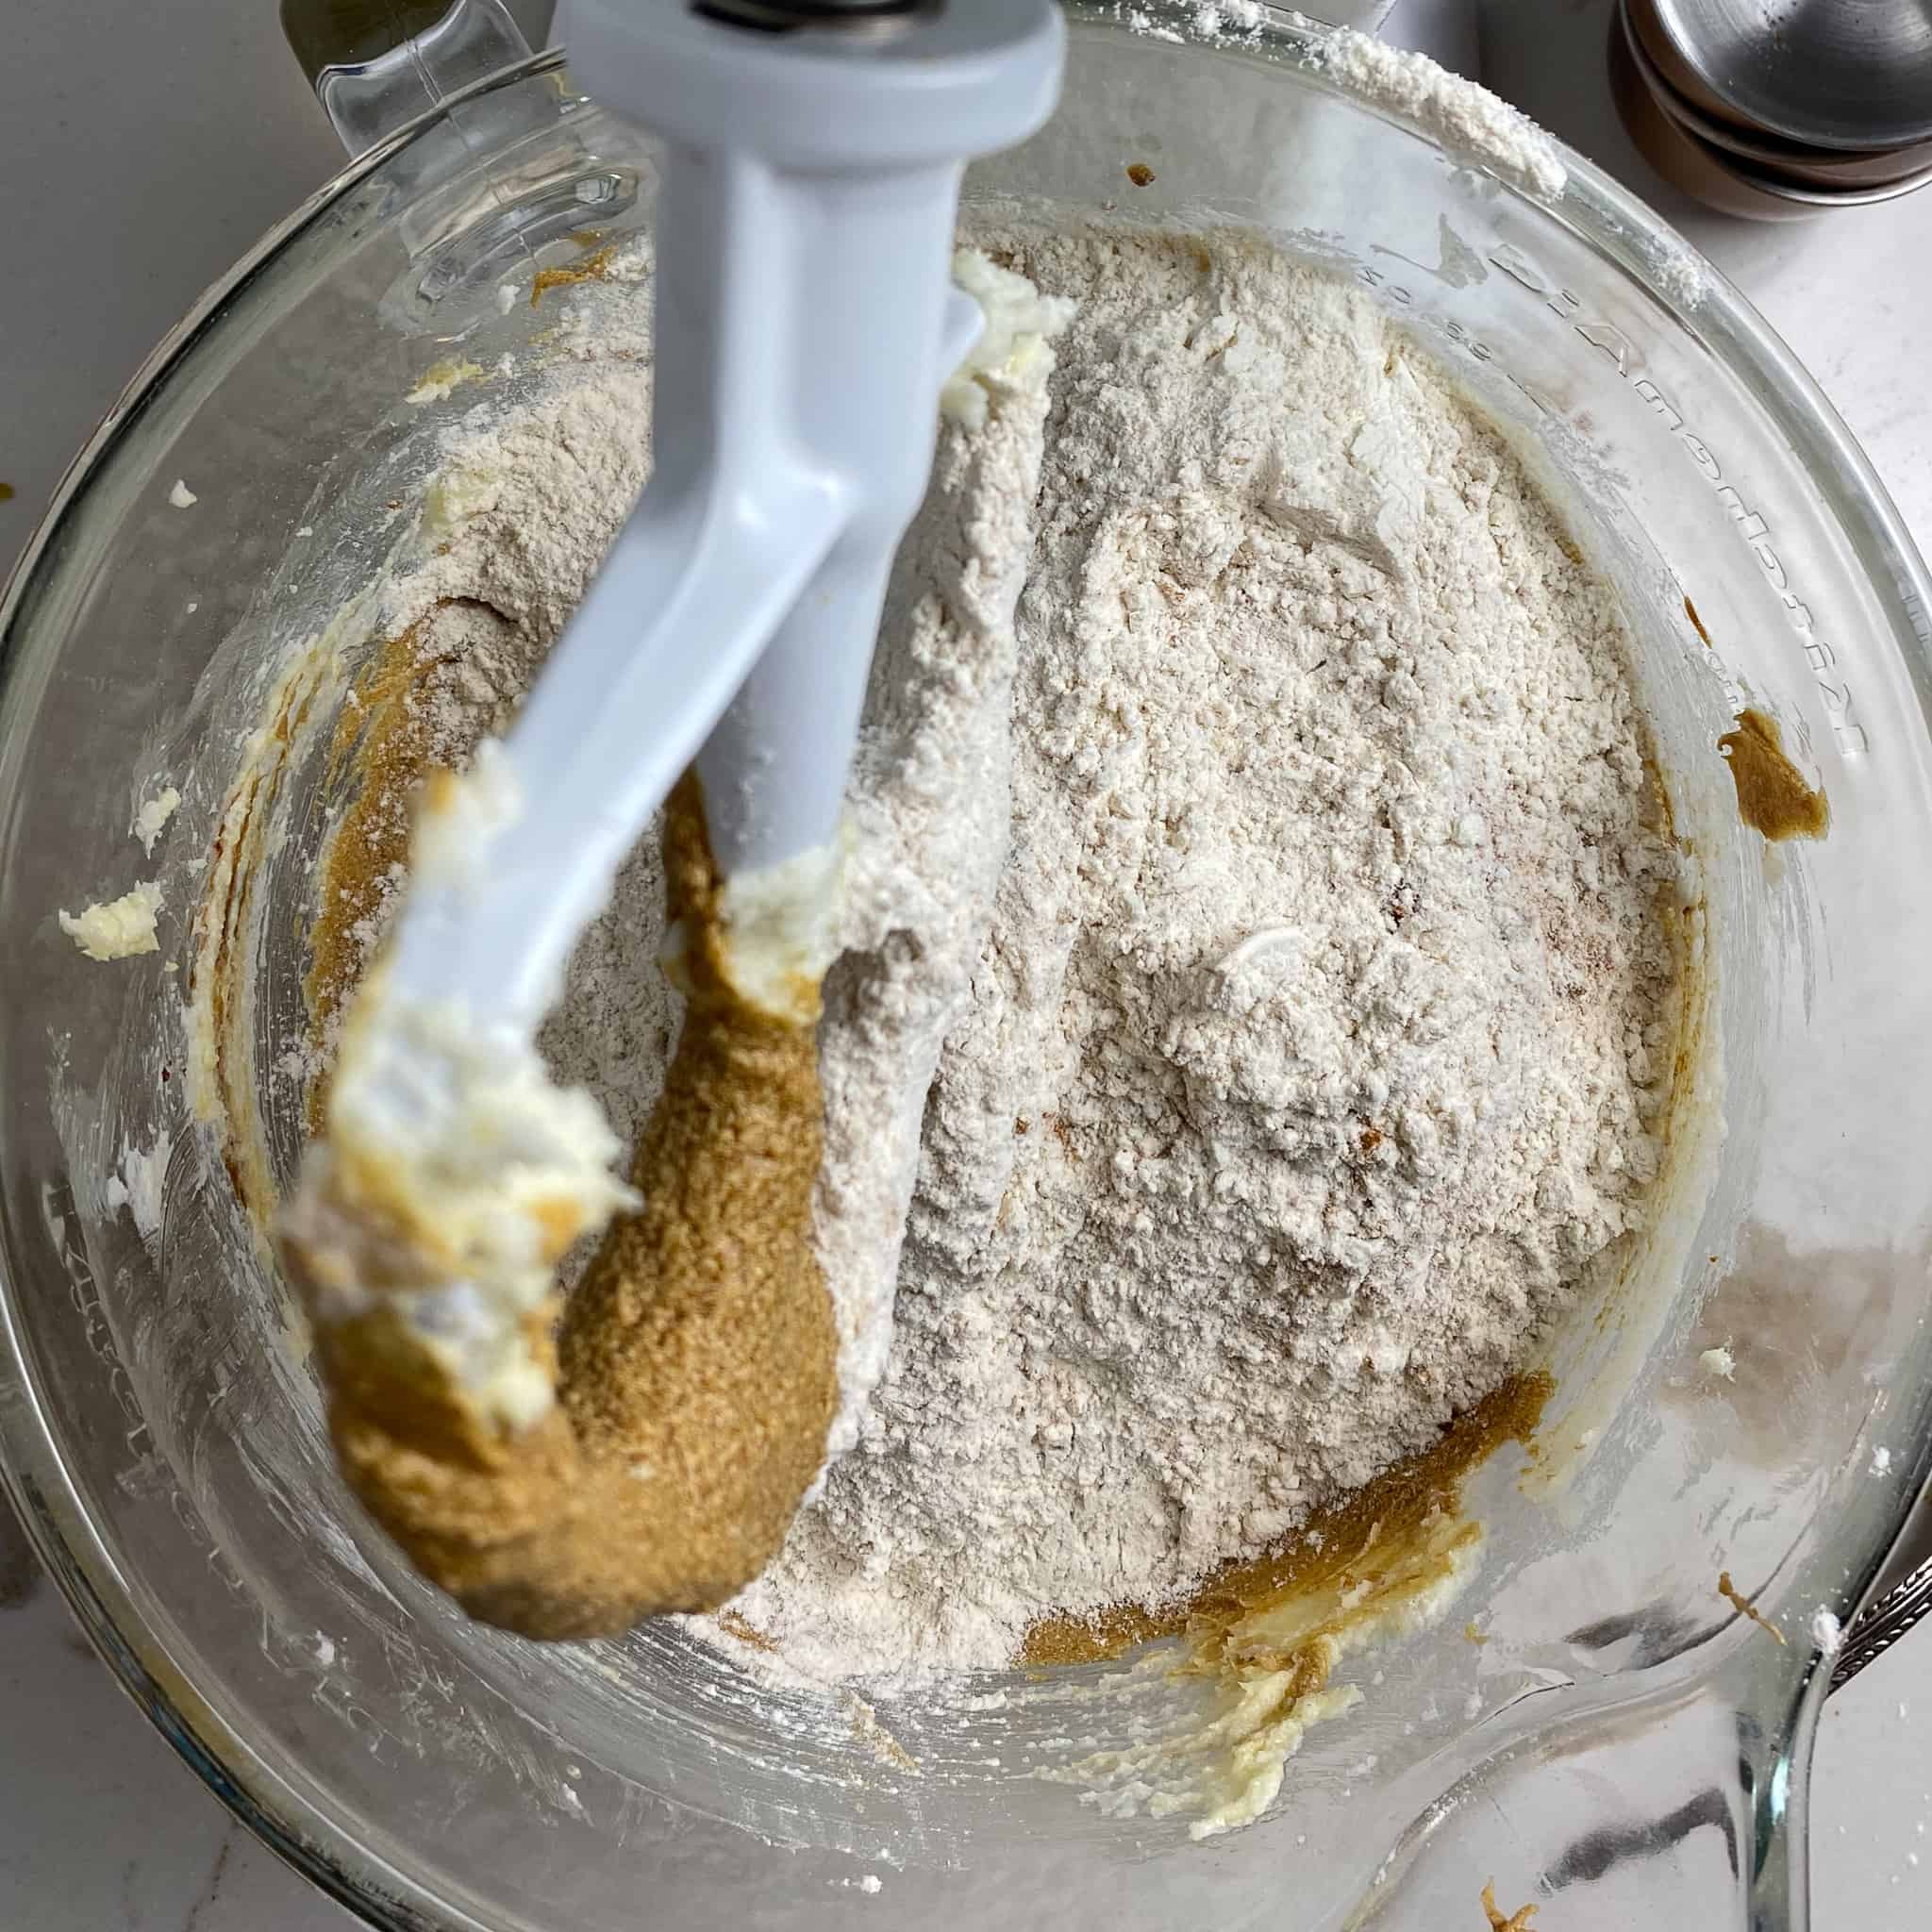 Flour being added to the wet ingredients for old fashioned ginger snap cookies.